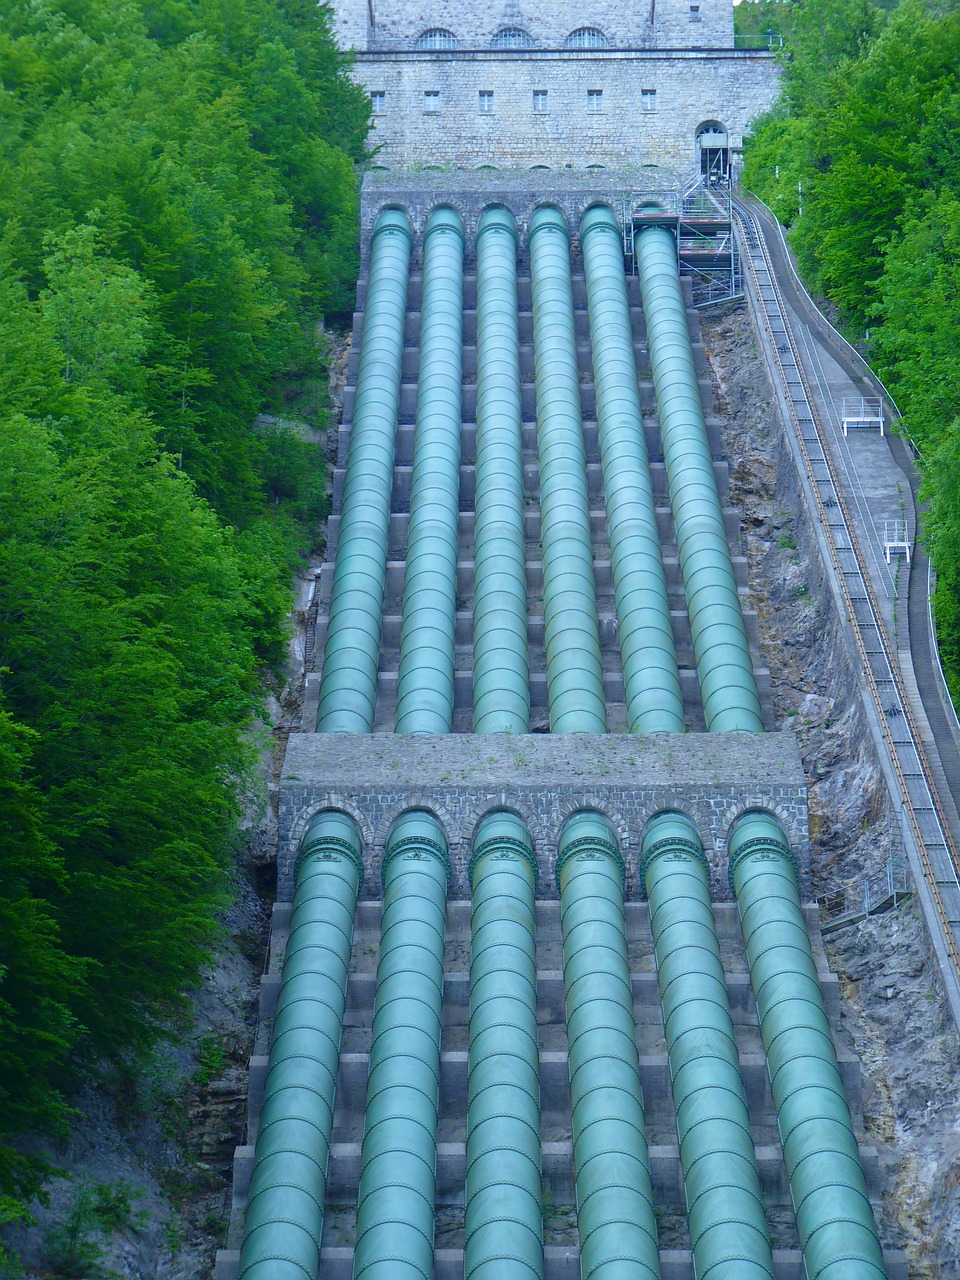 a bunch of pipes that are going down a hill, by Erwin Bowien, flickr, renaissance, water reservoir, gunma prefecture, green water, aqueducts